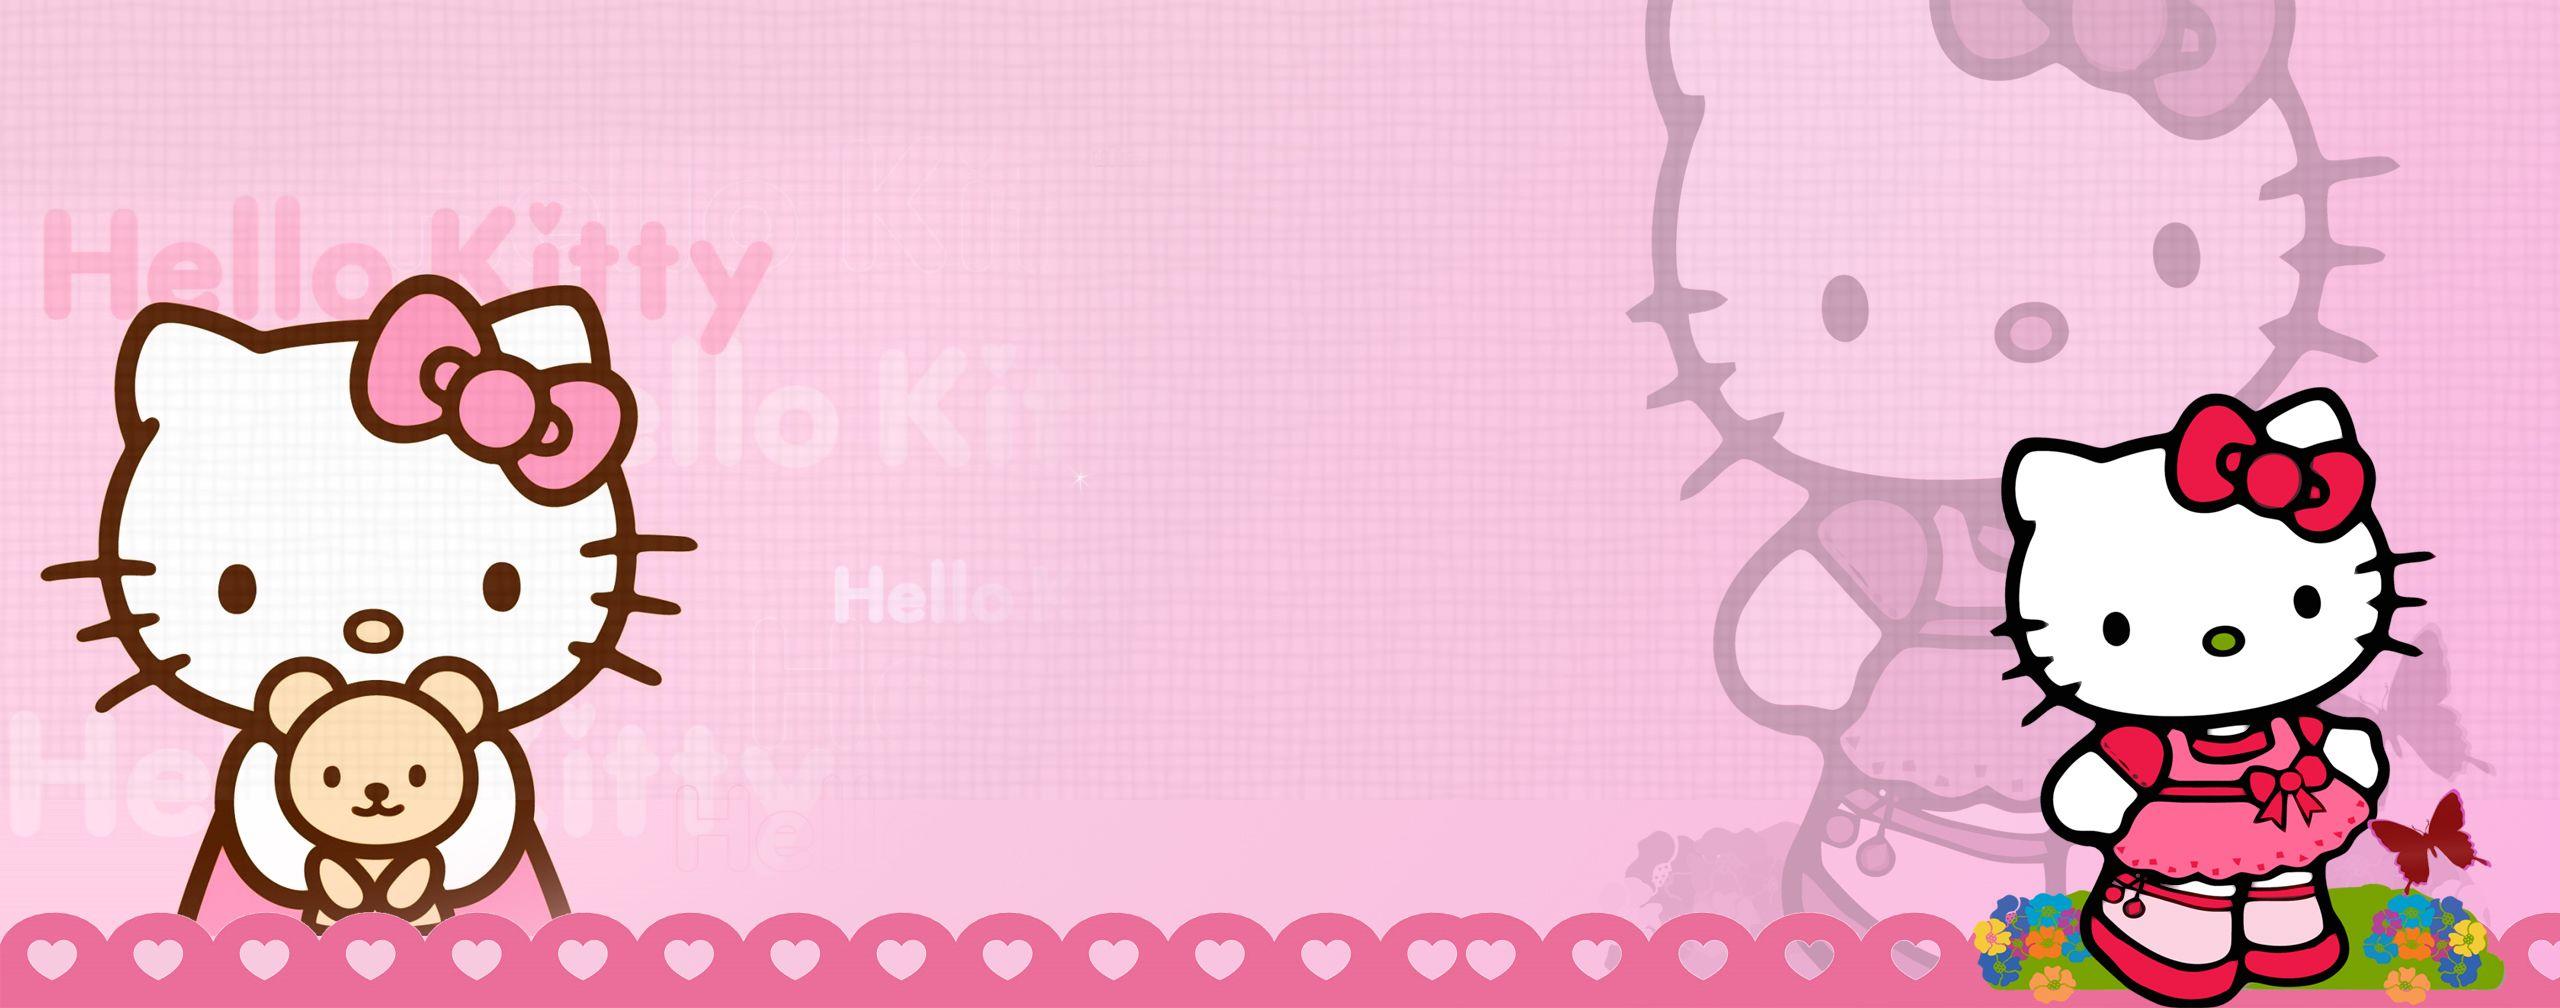 Dual Monitor Pink Wallpapers - Top Free Dual Monitor Pink Backgrounds